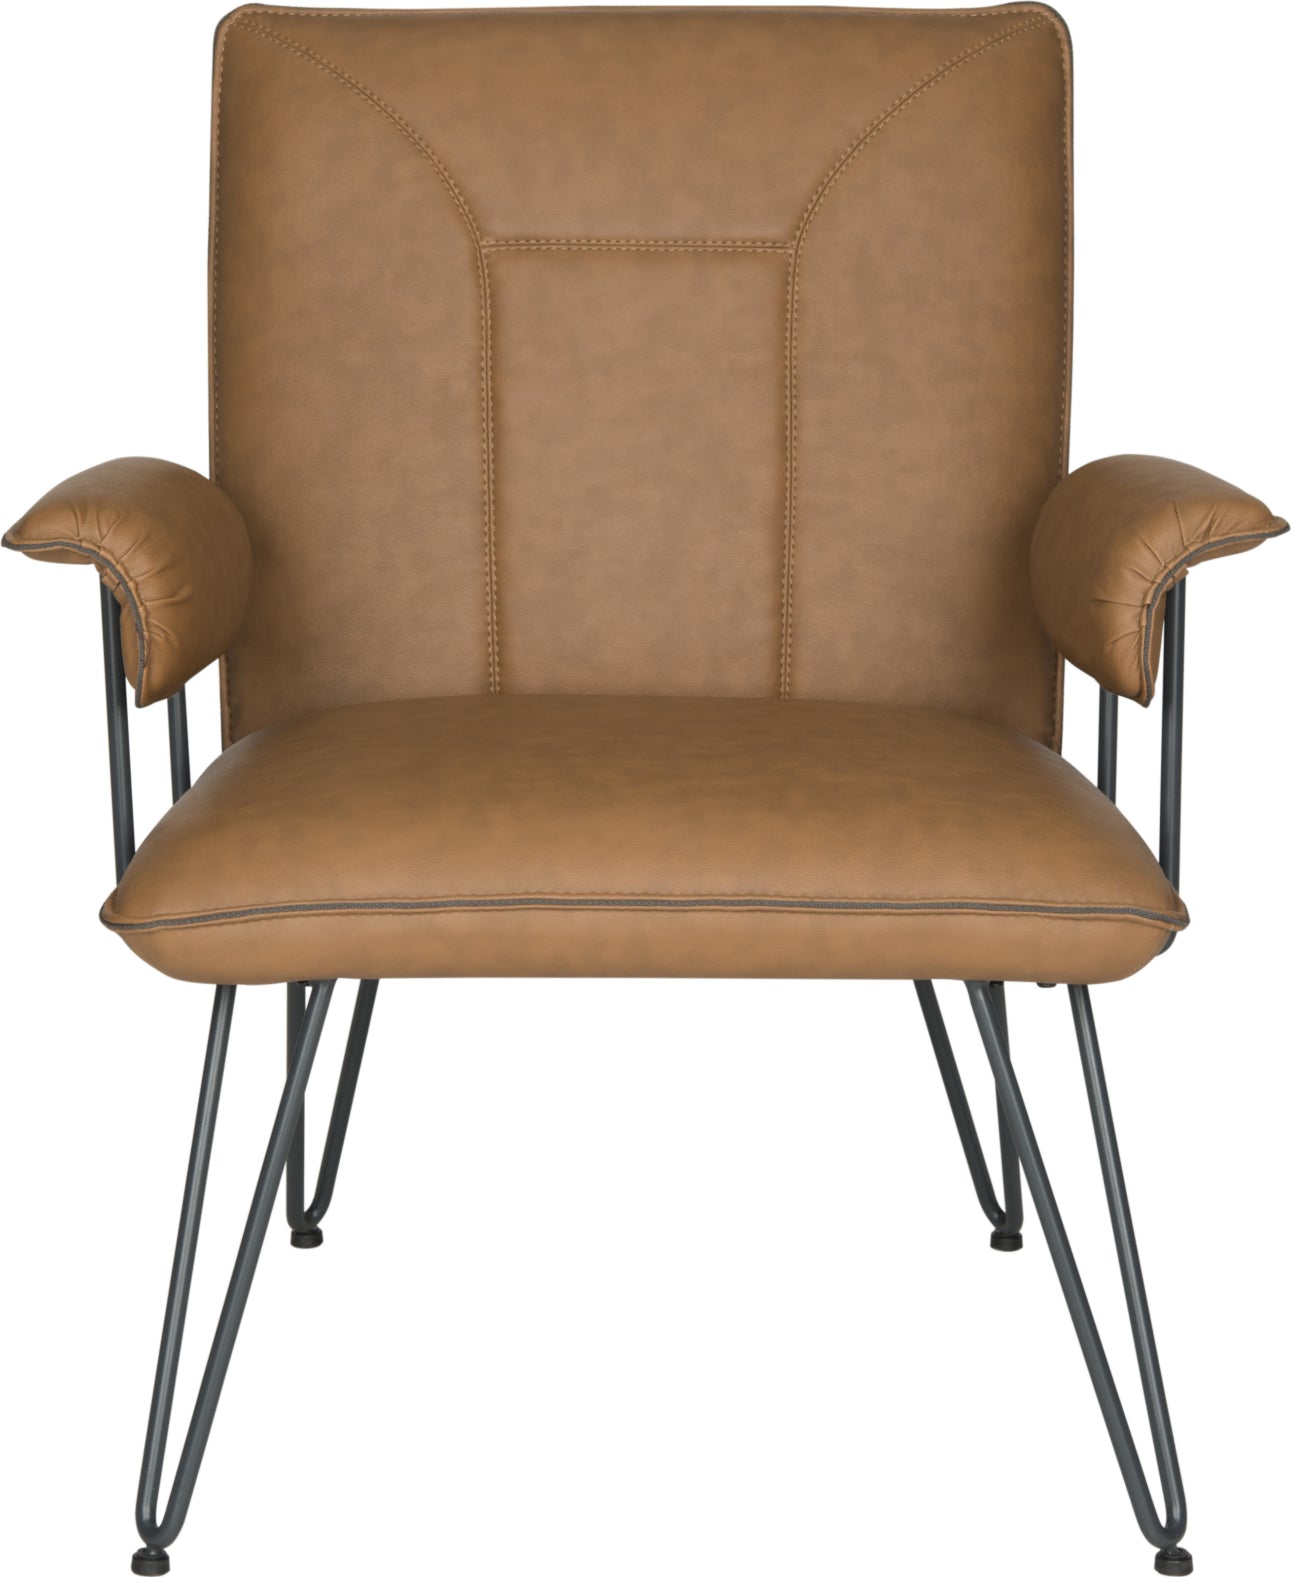 Safavieh Johannes 173''H Mid Century Modern Leather Arm Chair Camel and Black Furniture main image